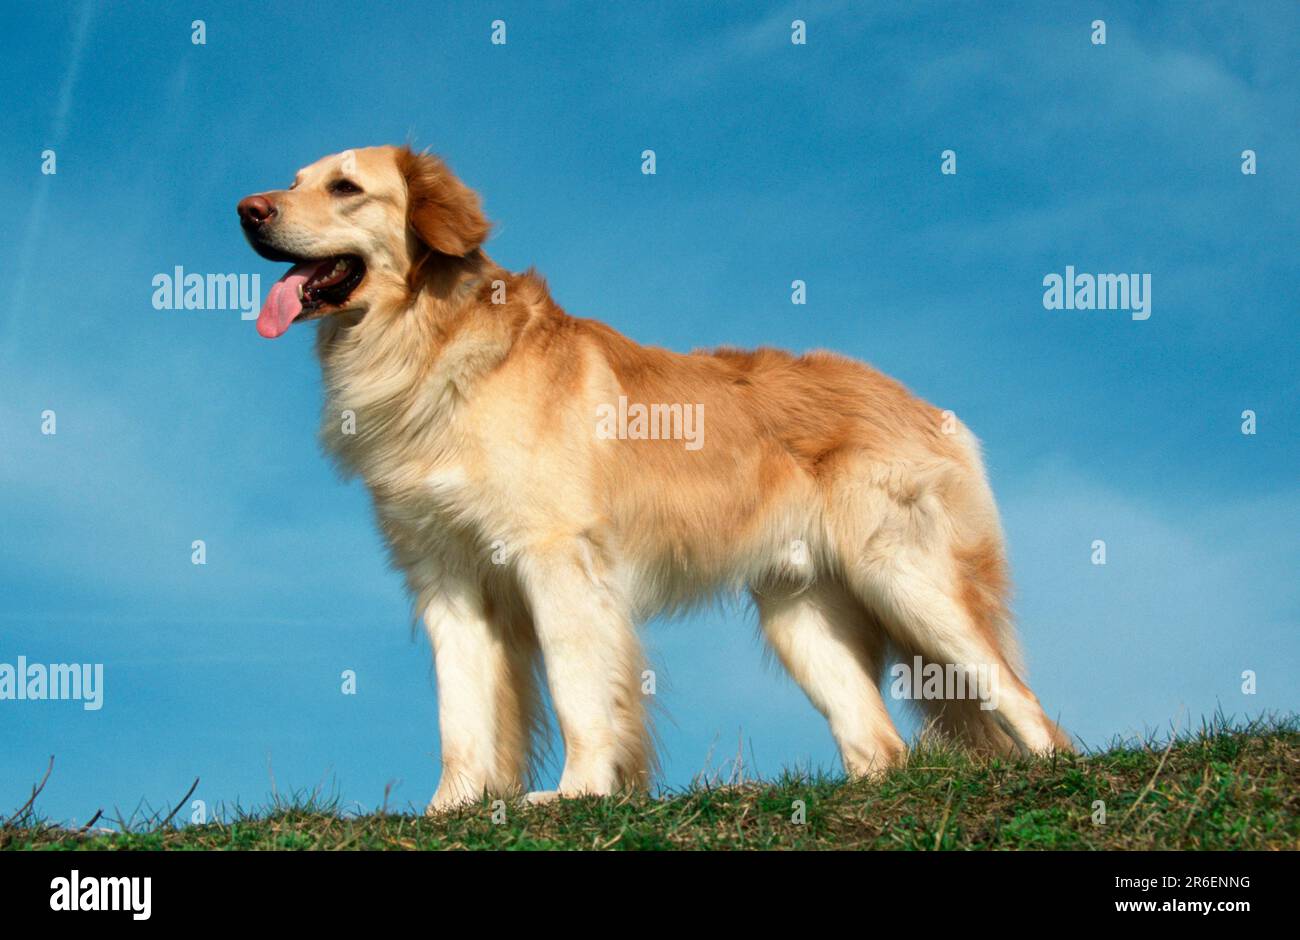 Hovawart, blond, animals, outside, outdoor, sideways, side, meadow, panting, standing, summer, adult, landscape, horizontal, mammals, mammals Stock Photo